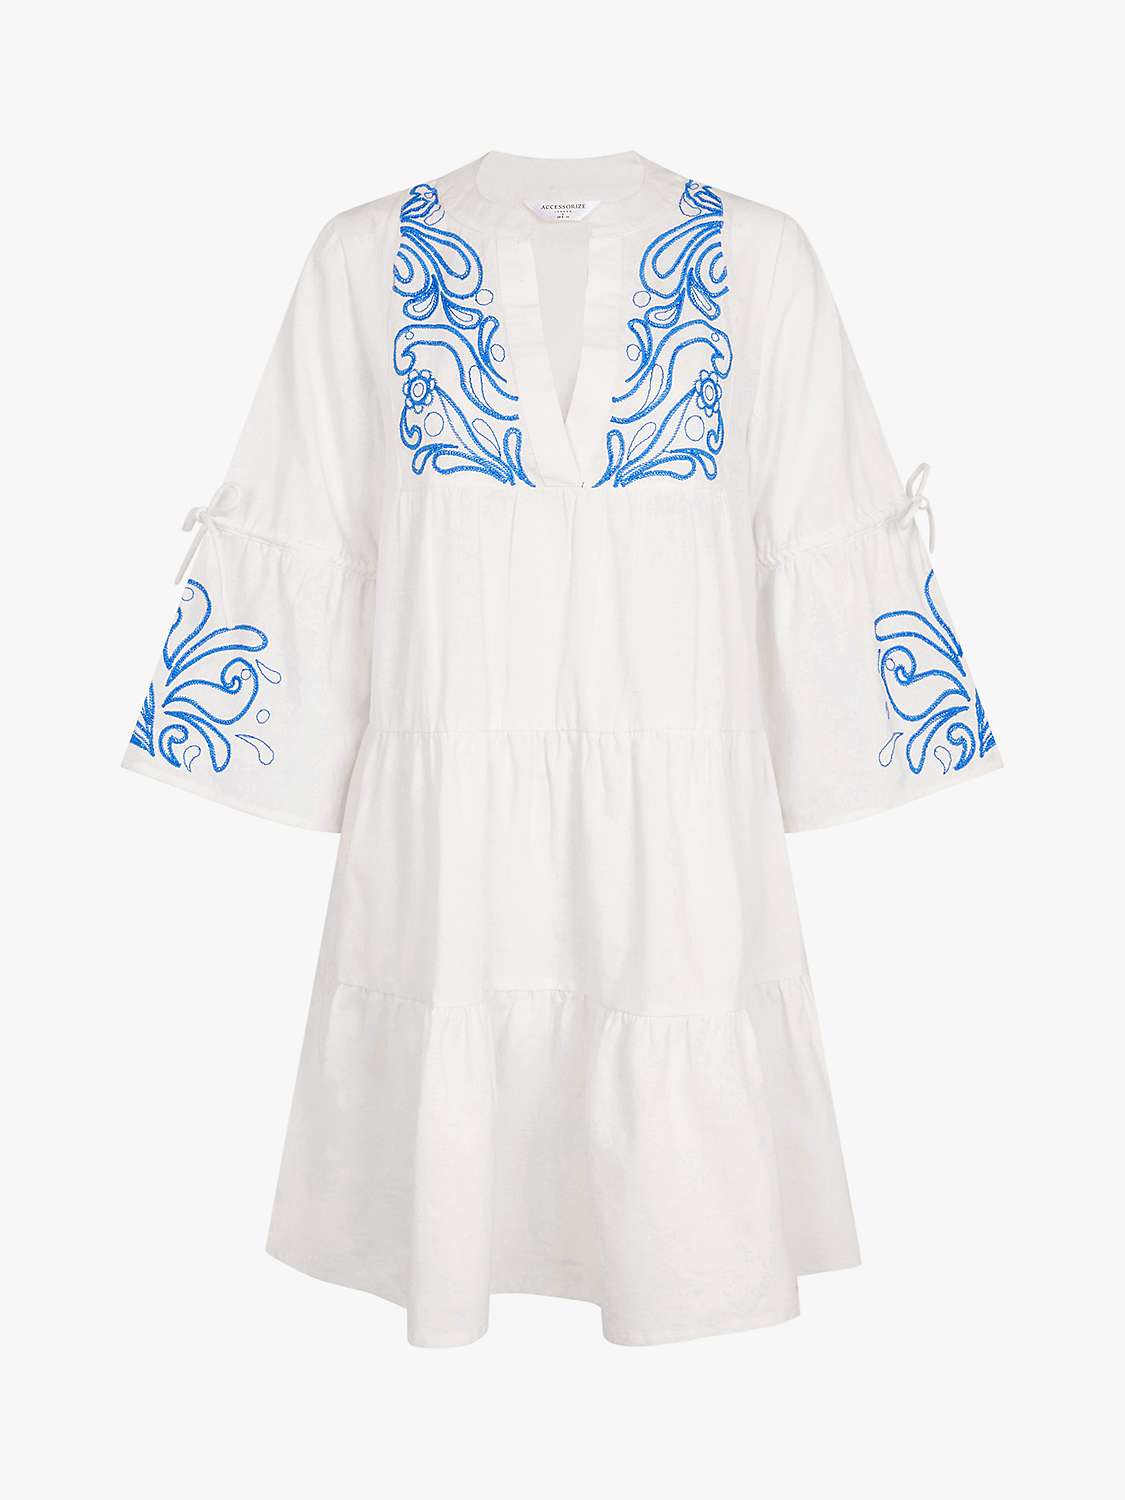 Buy Accessorize Linen Blend Embroidered Mini Dress, White/Blue Online at johnlewis.com